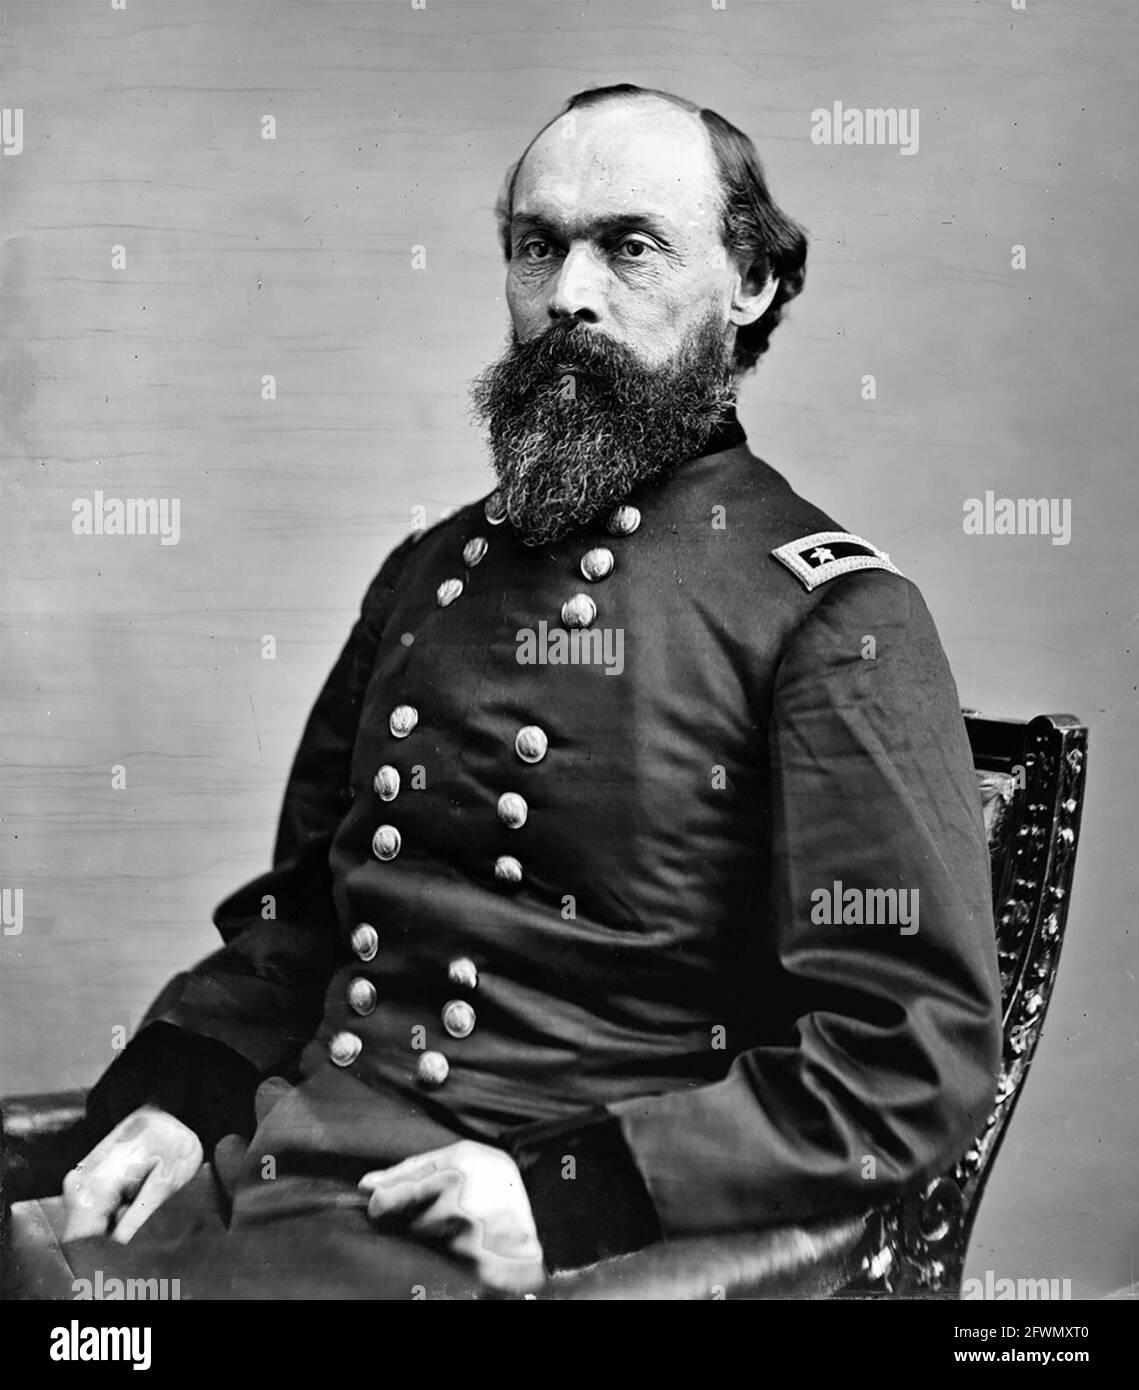 Gordon Granger was a career U.S. Army officer and a Union general during the American Civil War. Granger is best remembered for his June 19, 1865 proclamation in Texas that all slaves are free, commemorated today by the Juneteenth celebration. Stock Photo